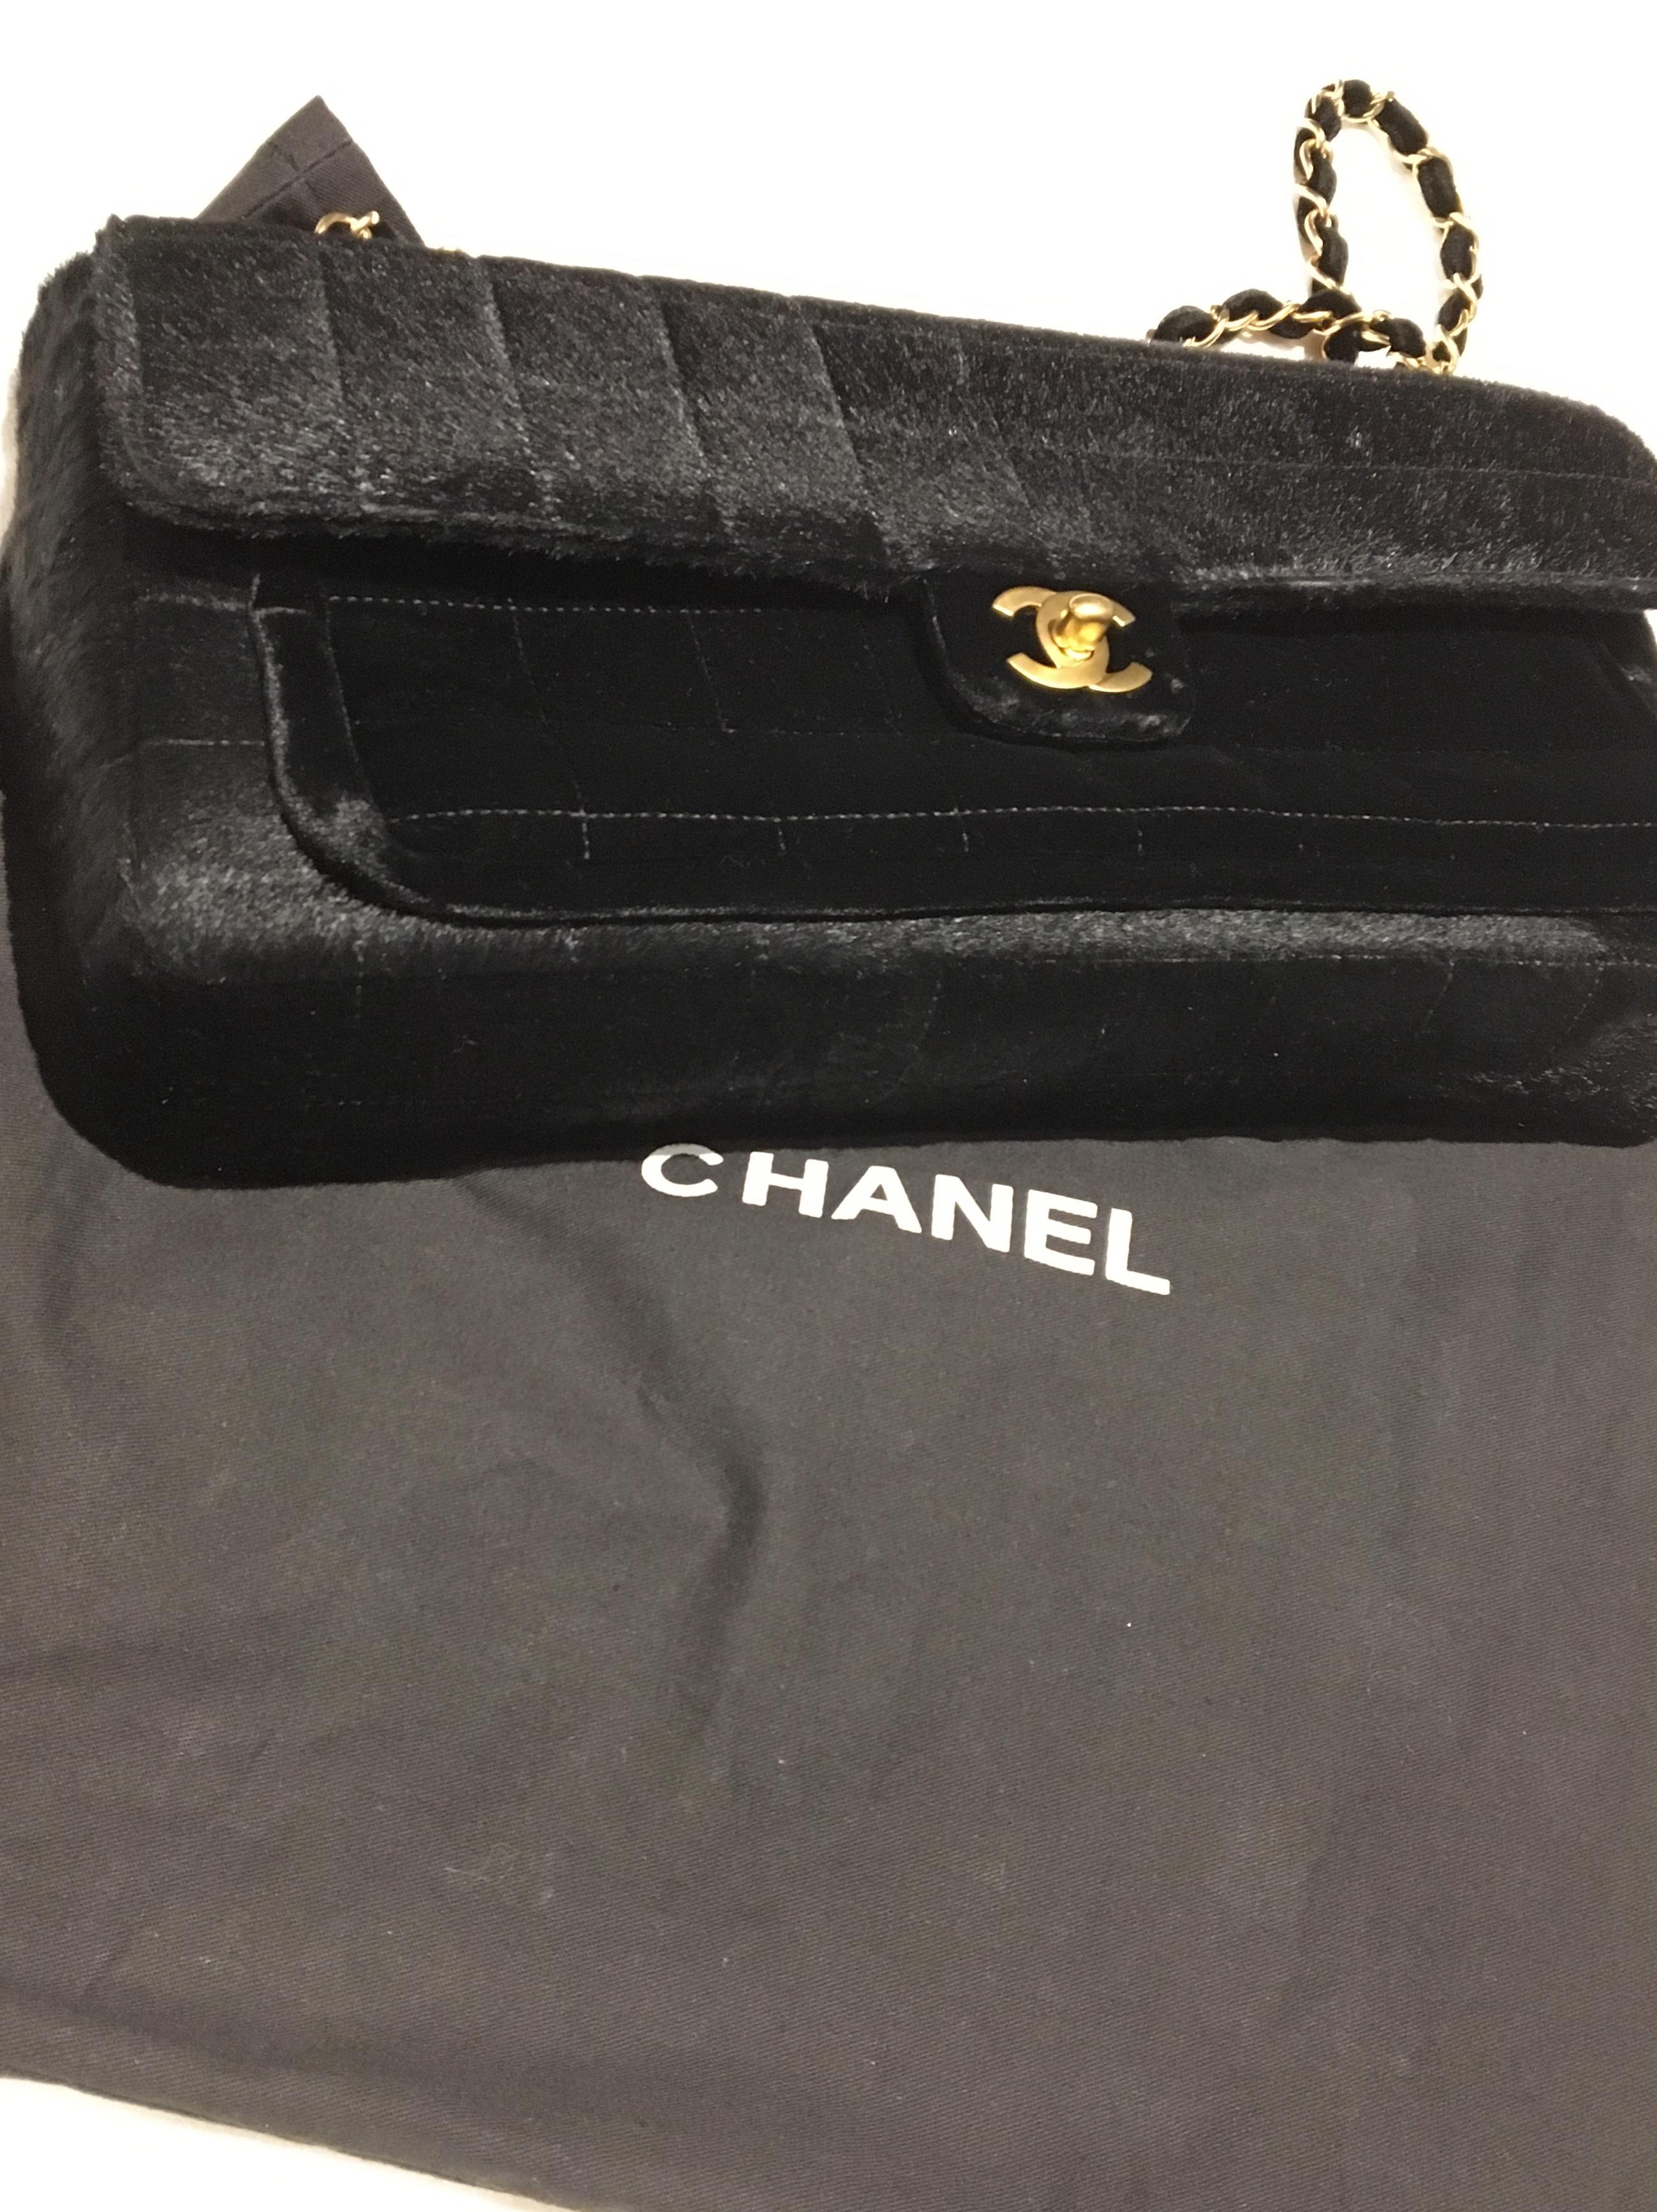 Super classy Chanel  Timeless Black Crossbody bag in Calfskin and leather from 2002 collection
Used but good condition, really light signs of use.
Card, hologram and dustbag
Size 32 cm
